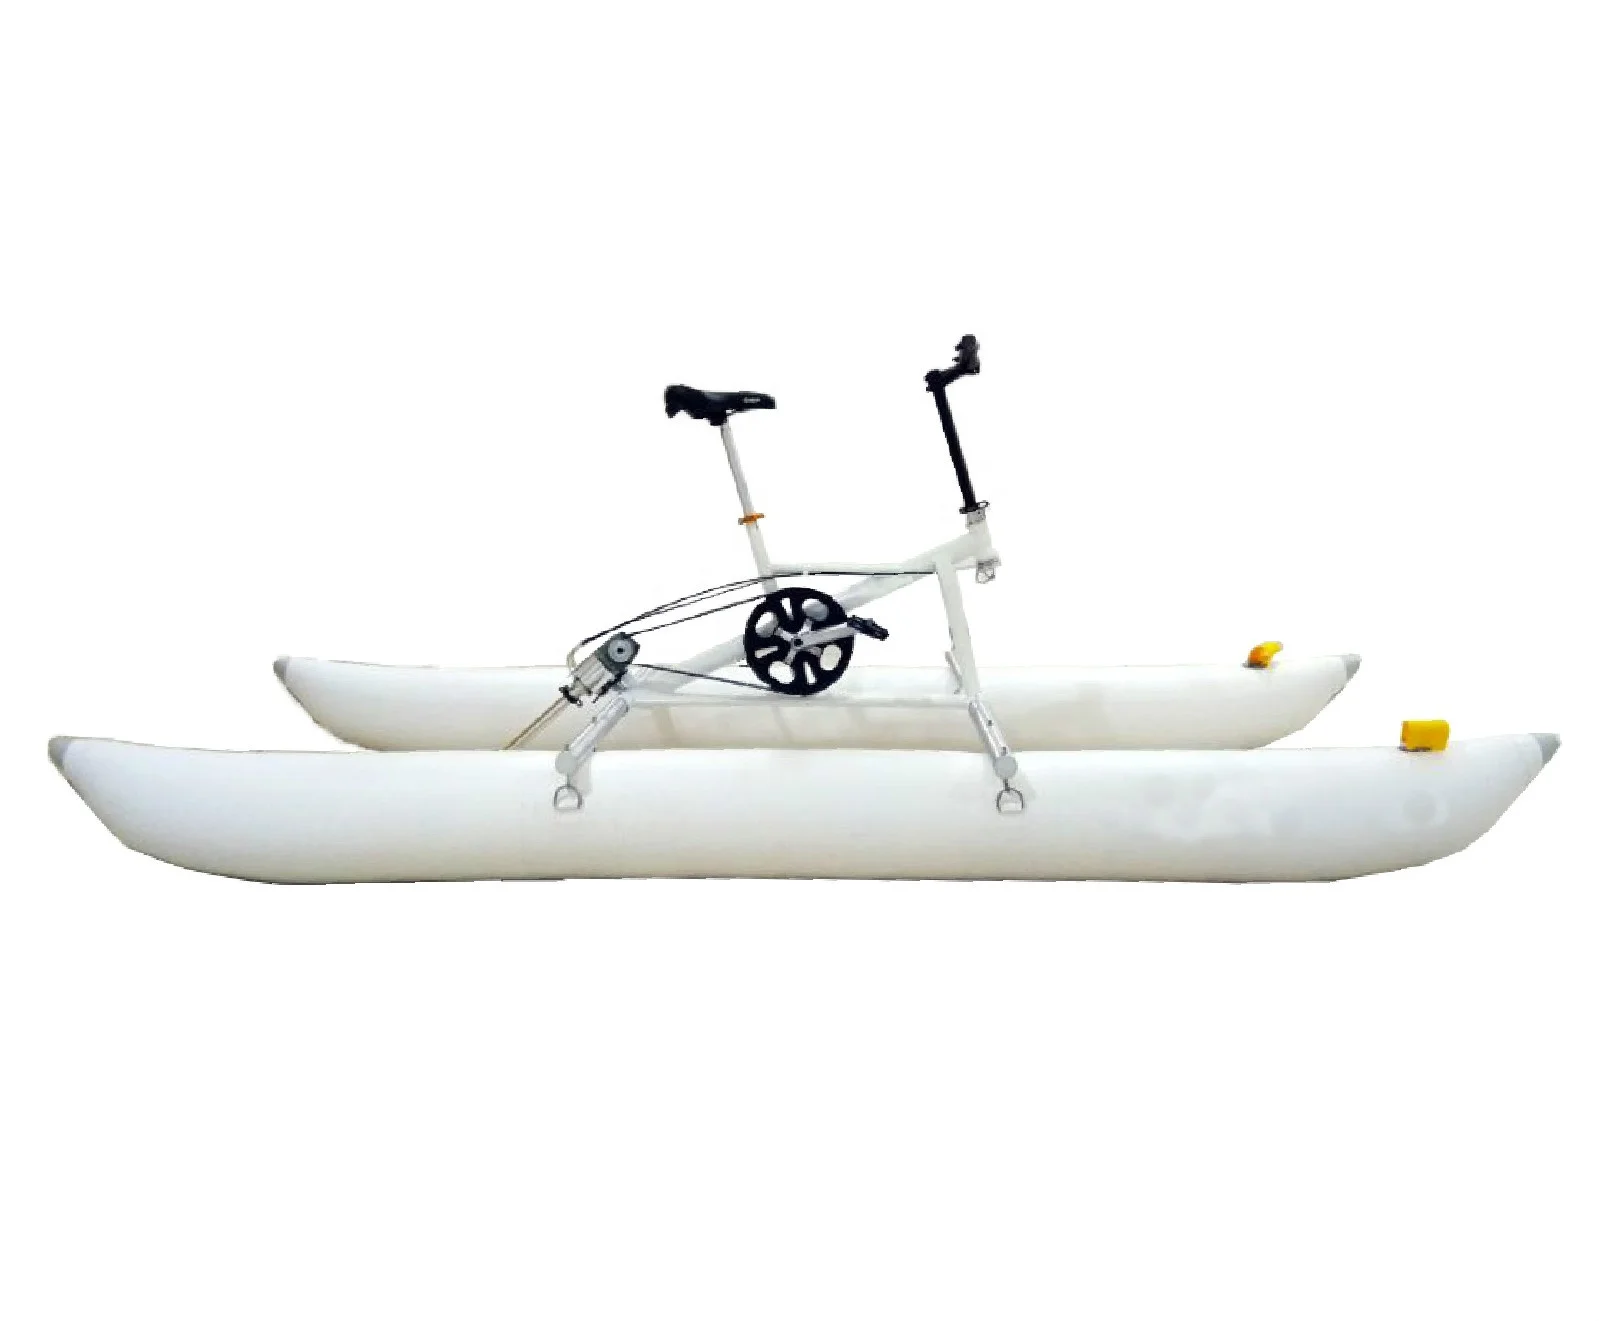 

Portable Water Bike Free Shipping No Tax Kayak Boat Inflatable Yacht Sea Pedal Bicycle for Water Sports For Aquatic Park, Customized